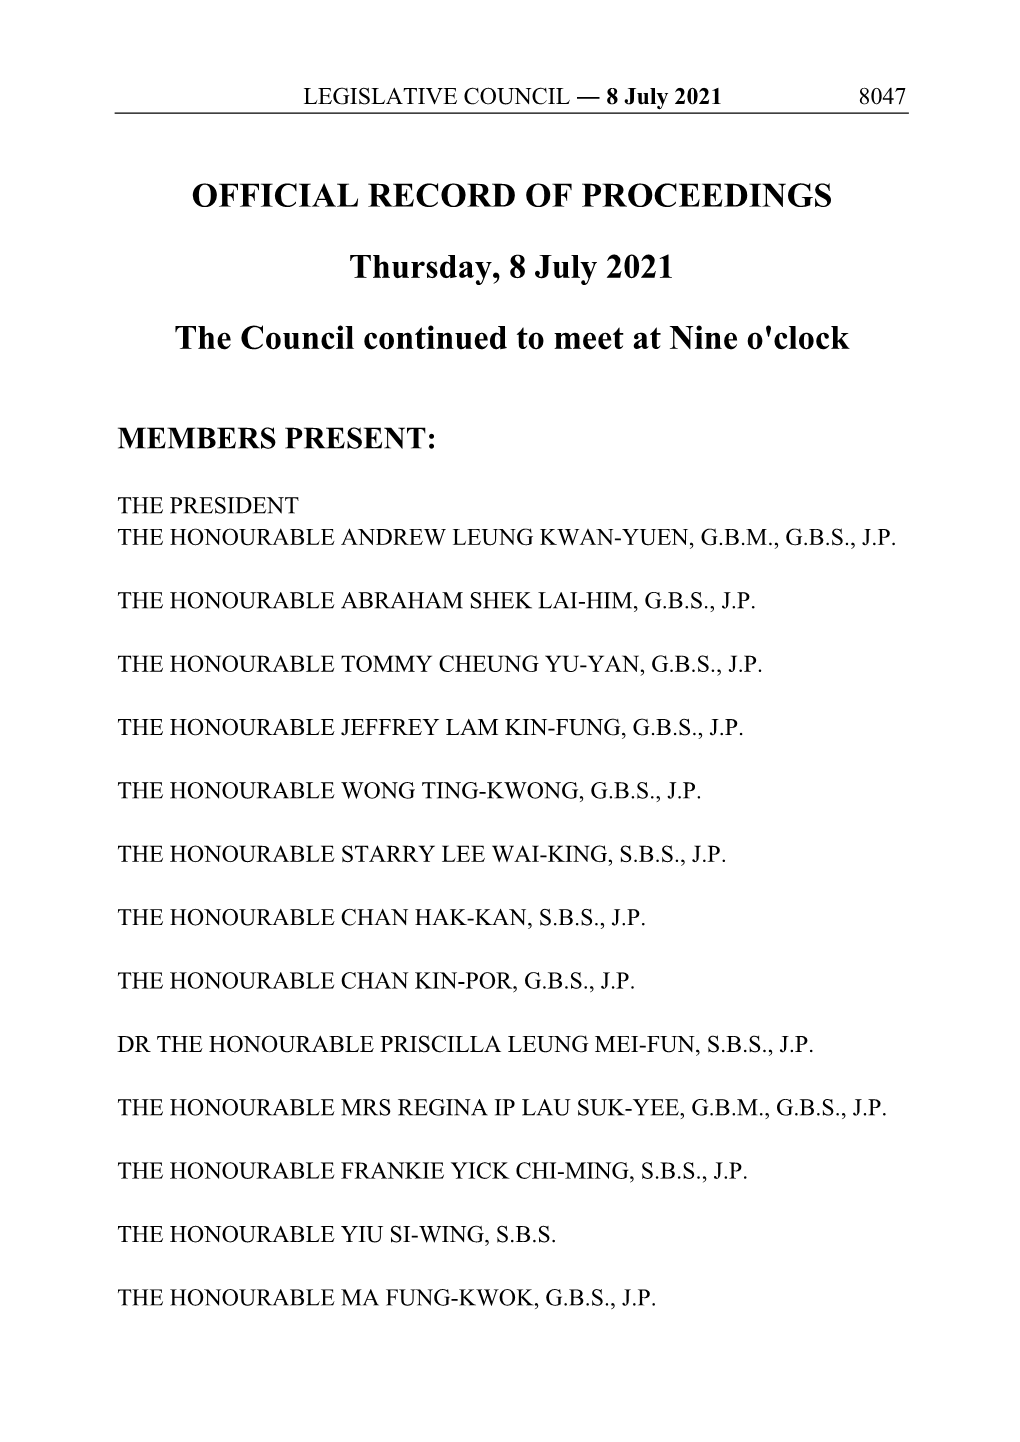 OFFICIAL RECORD of PROCEEDINGS Thursday, 8 July 2021 the Council Continued to Meet at Nine O'clock